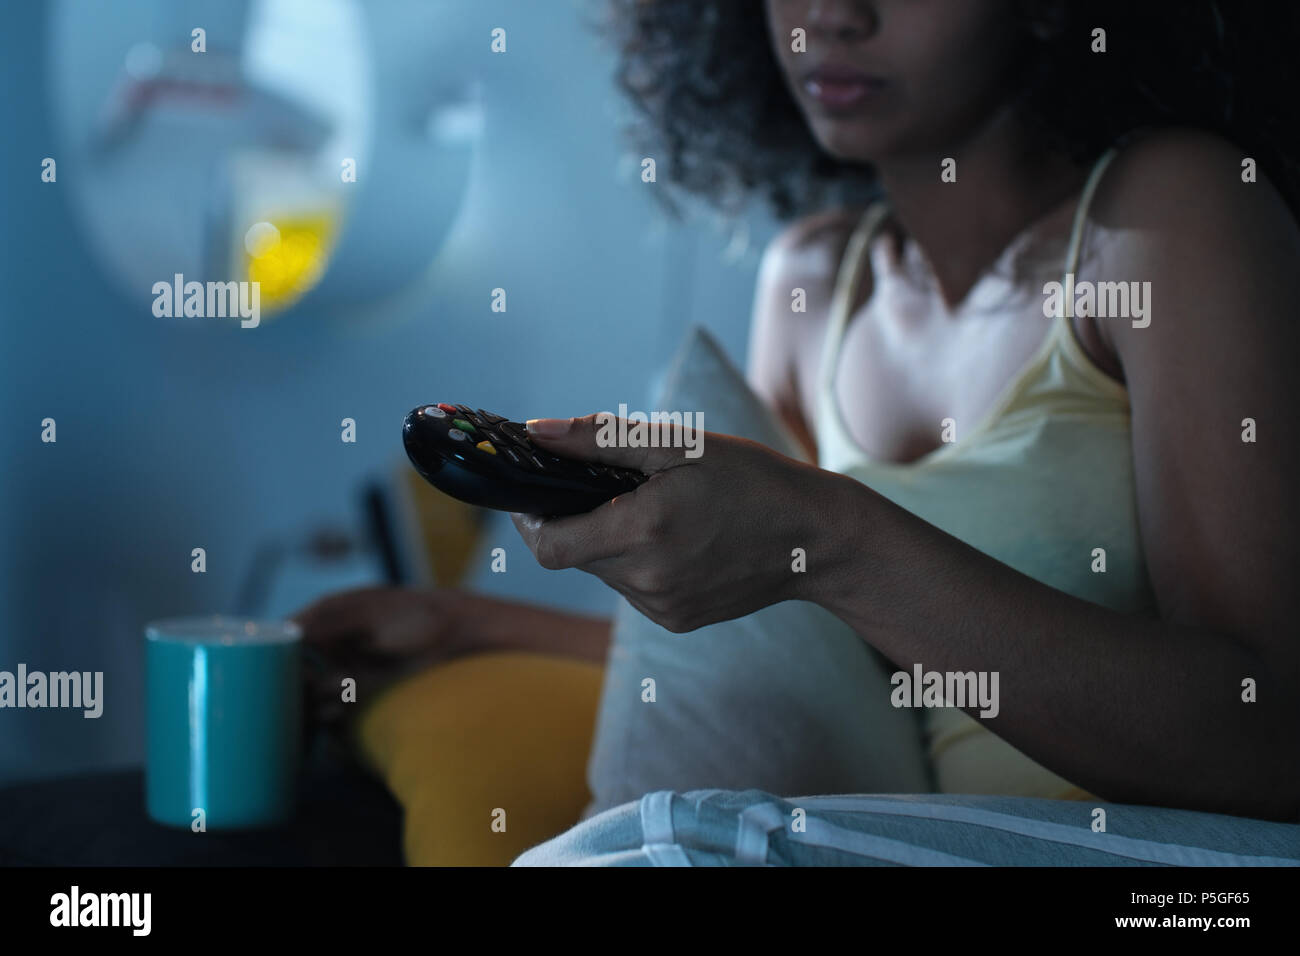 Black Woman Changing TV Channel With Remote At Night Stock Photo